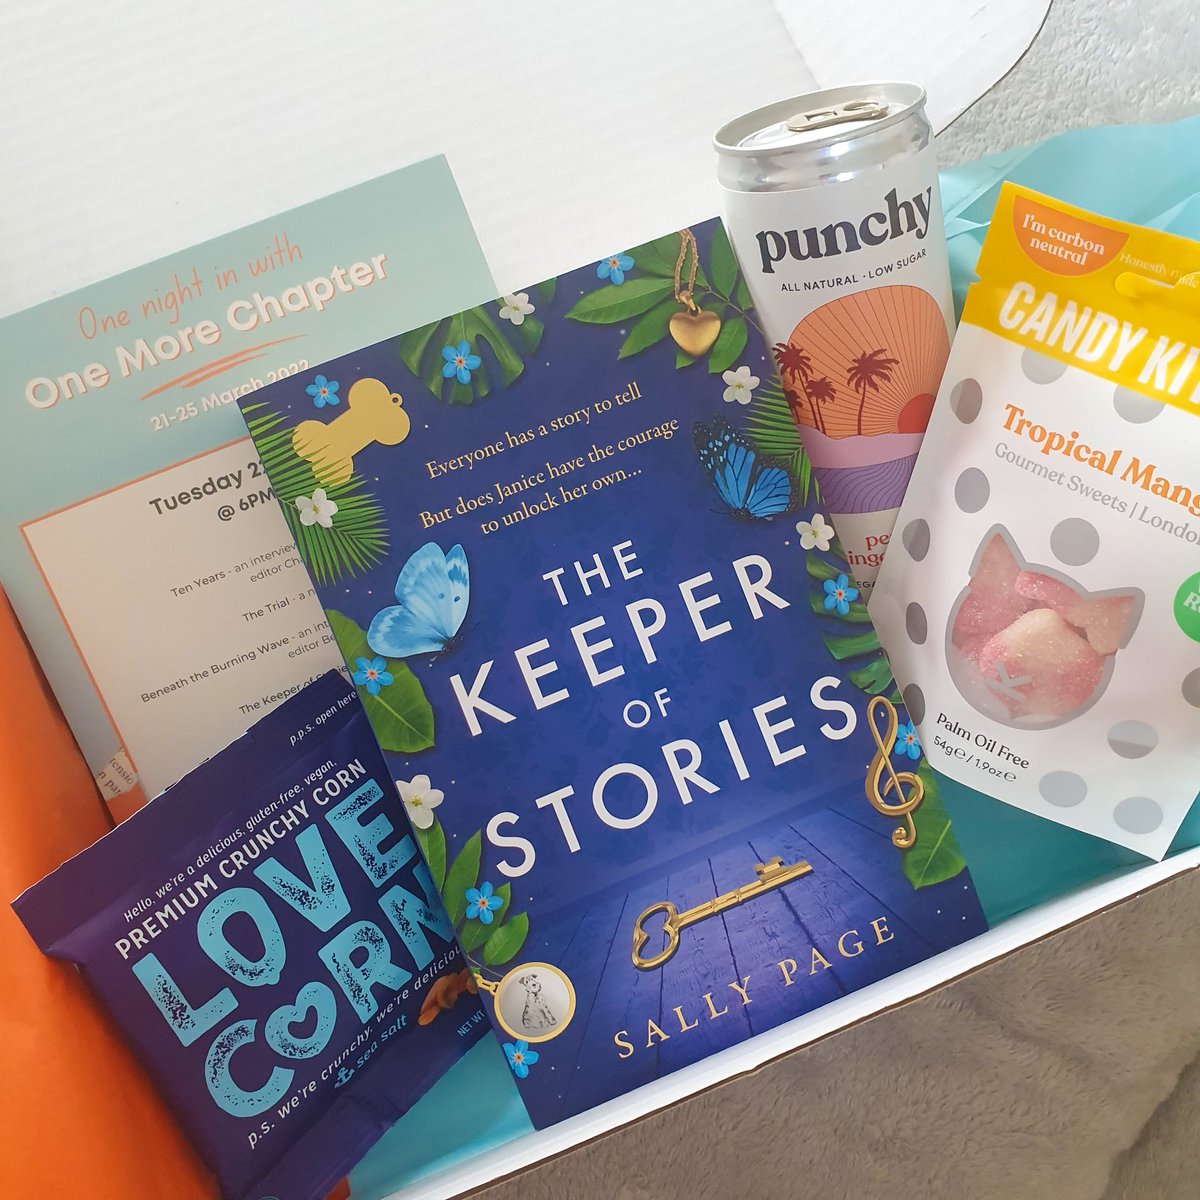 Huge thank you to @0neMoreChapter_ for my snack pack and surprise copy of #TheKeeperOfStories ahead of the showcase tomorrow evening! I'm looking forward to it 😊❤

#OneMoreChapter #OneNightInWithOMC